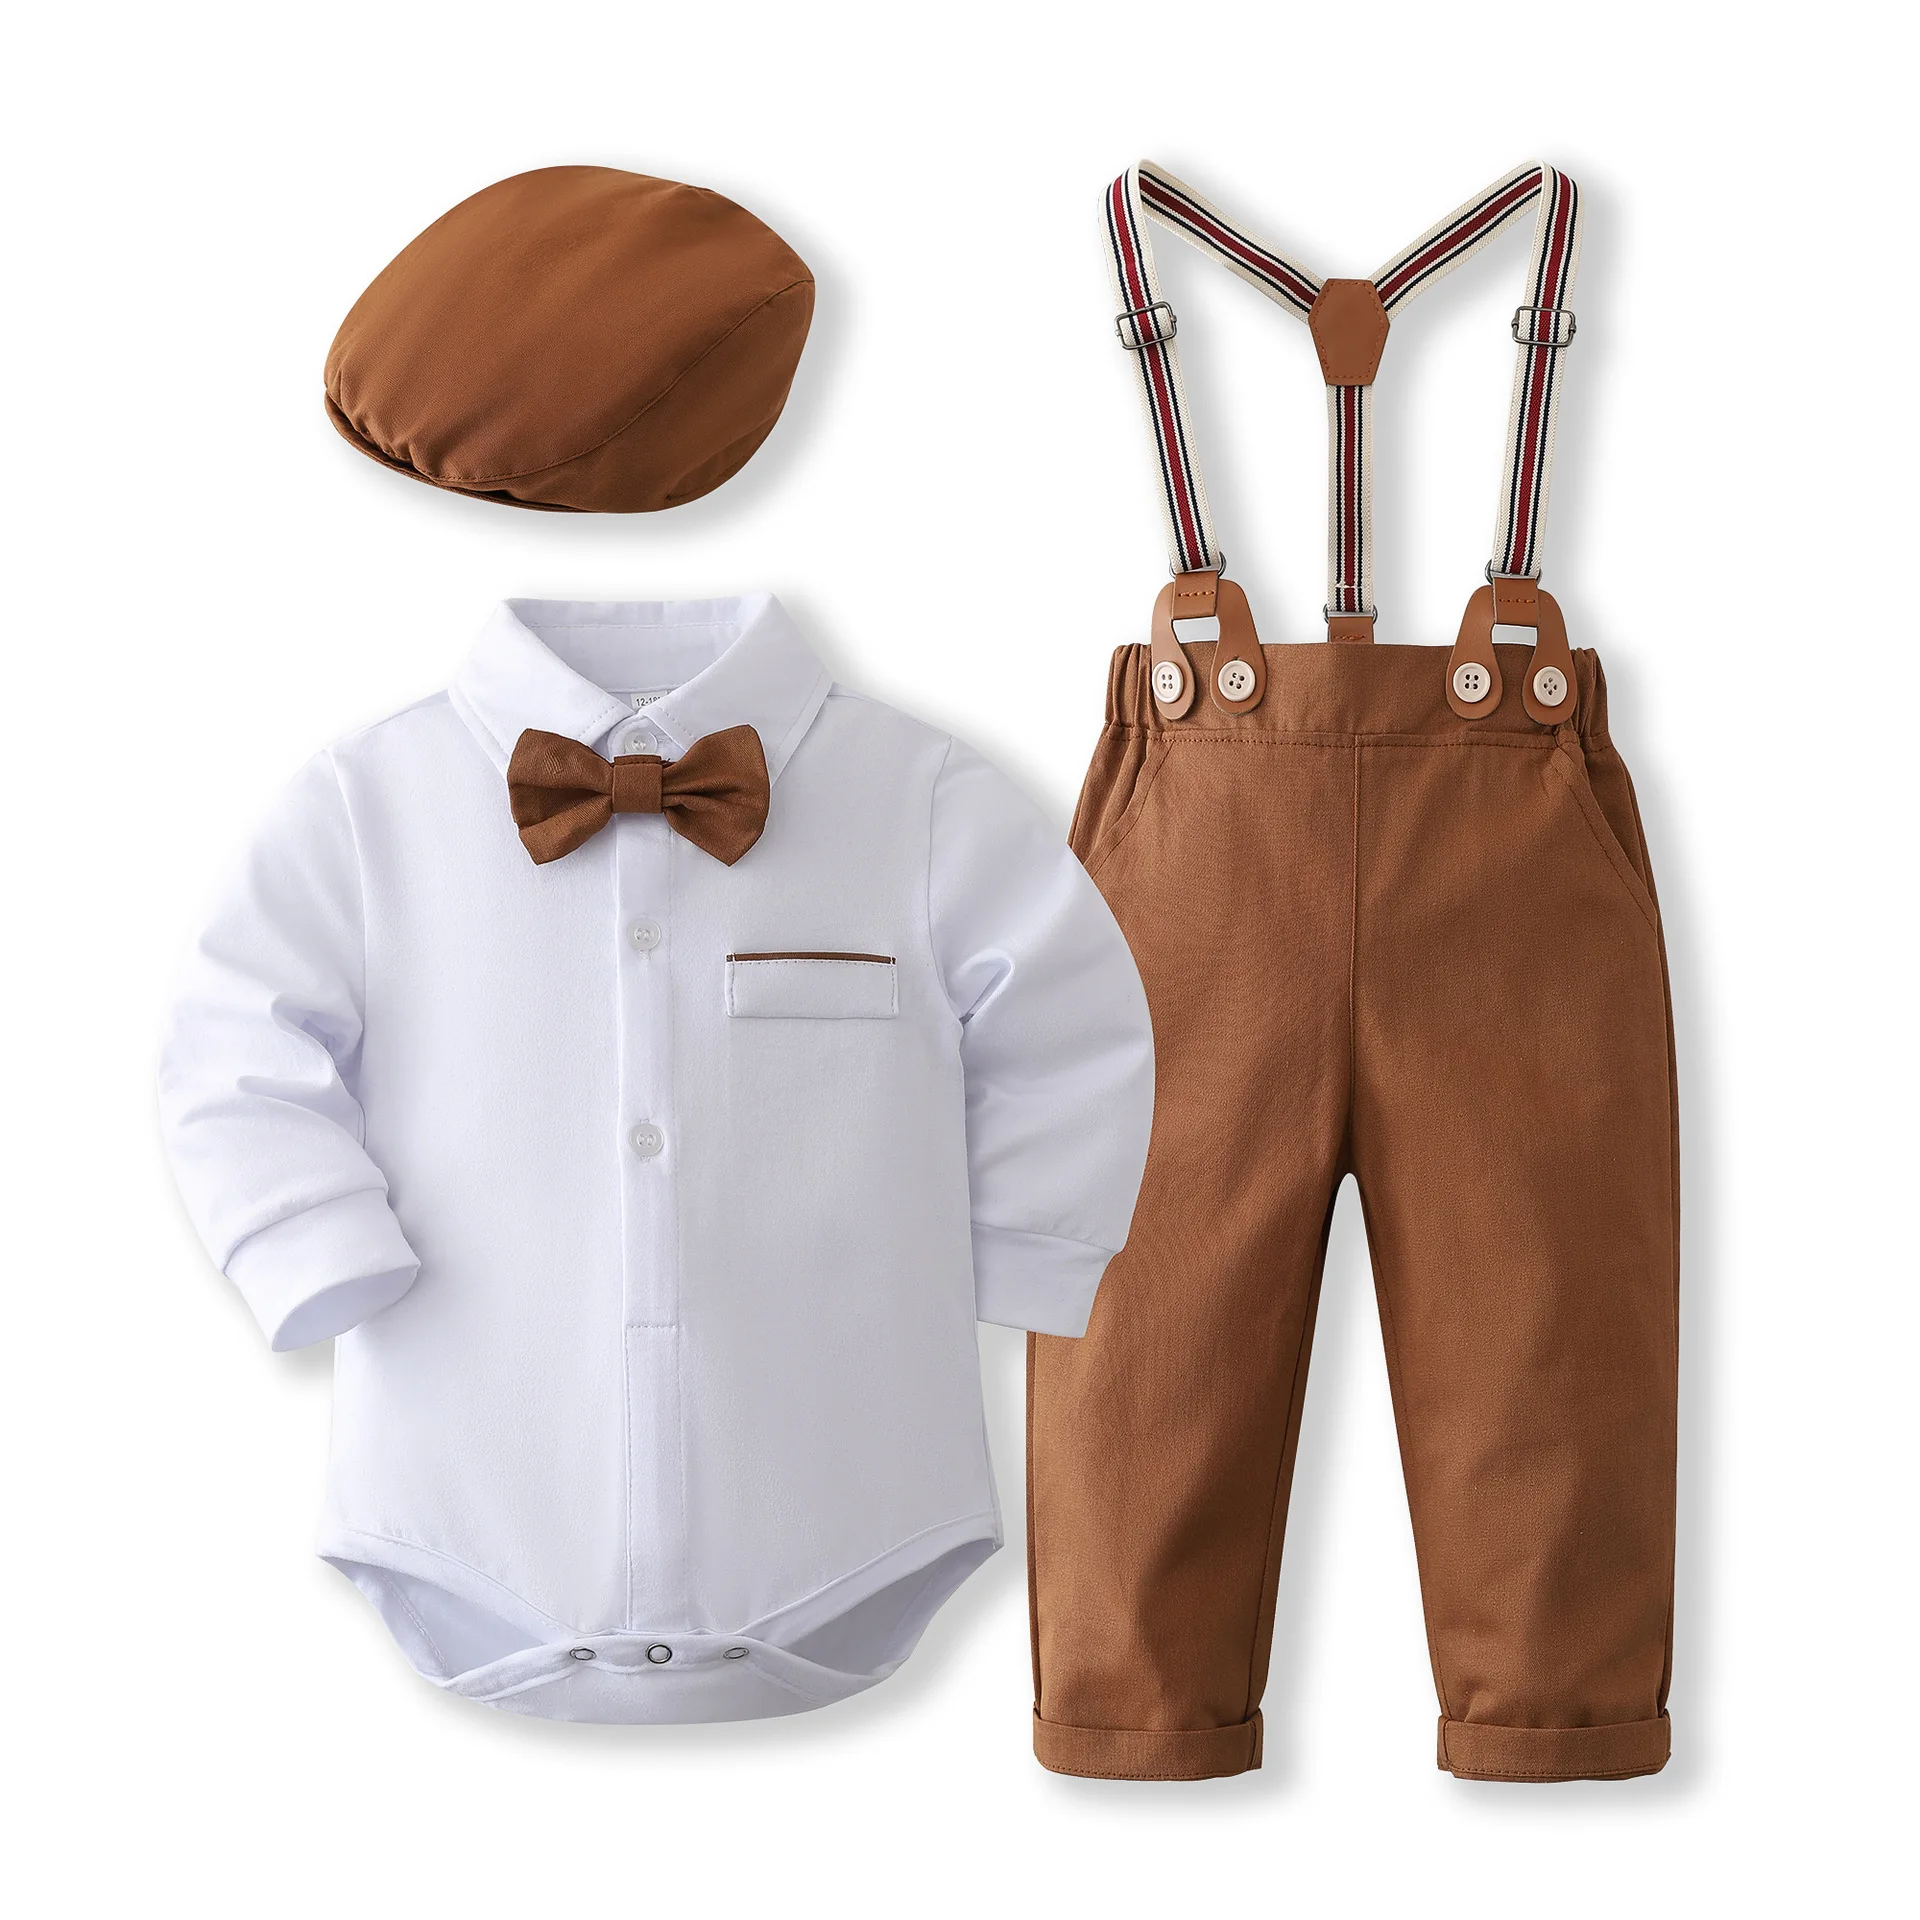 

Baby Suits Newborn Boy Clothes Romper + Vest + Hat Formal Clothing Outfit Party Bow Tie Children Birthday Dress New Born 0- 2Y